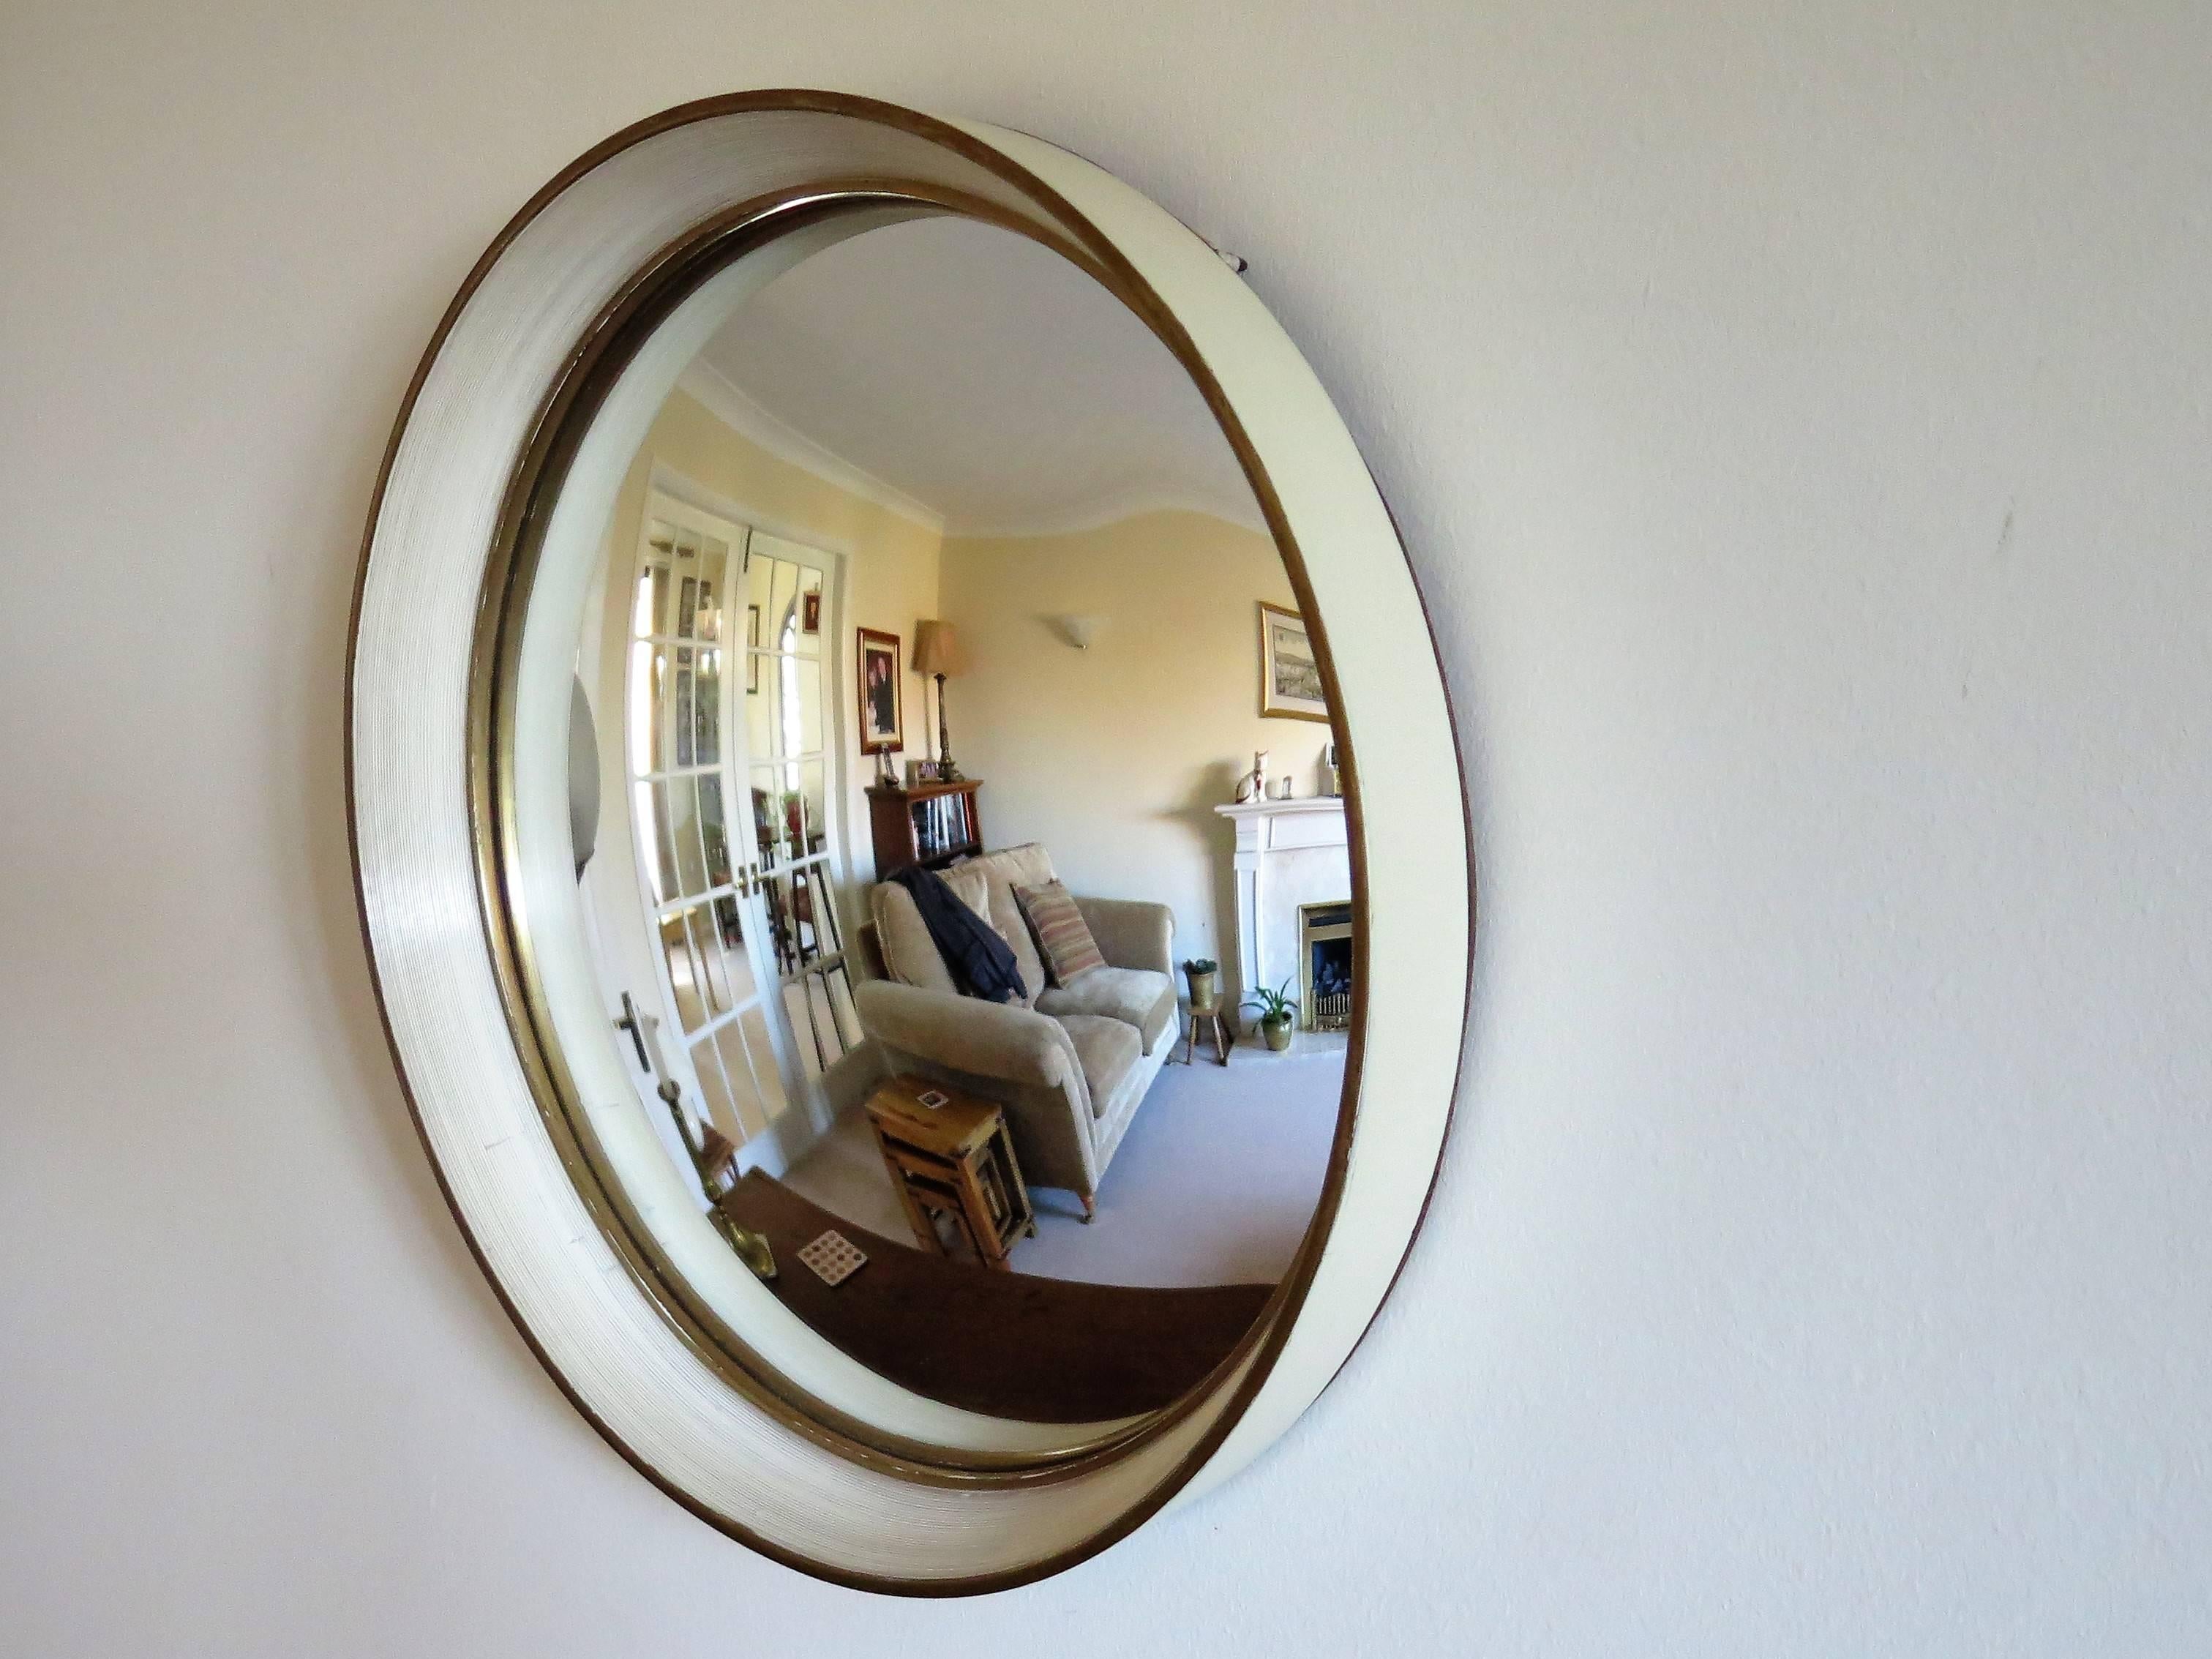 This is a good quality wall mirror with a convex glass and unusual frame detail.

The frame is made of turned wood. The front has a slight outer taper with the outer front diameter being about 13.38 inches and the outer back diameter, slightly